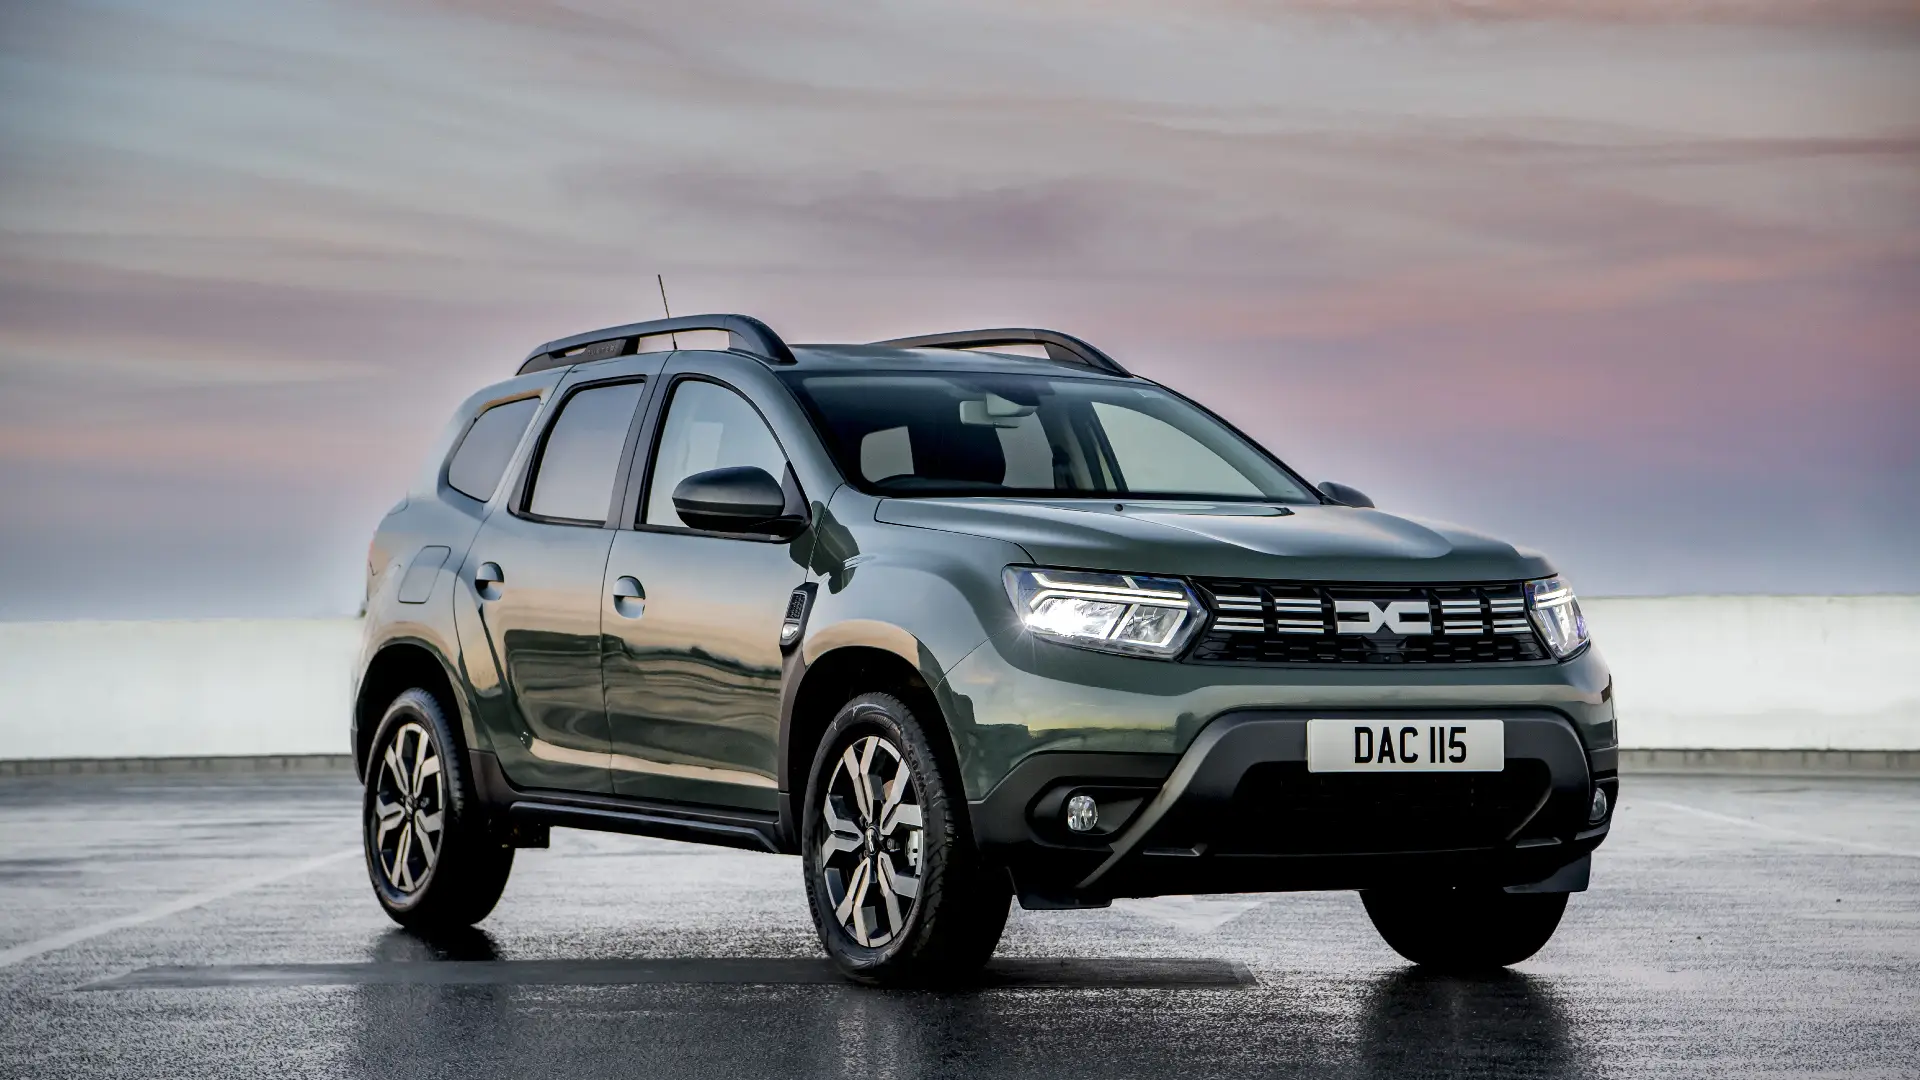 Speculation Grows Over Possible New Renault Duster Camper Version Following Image Release